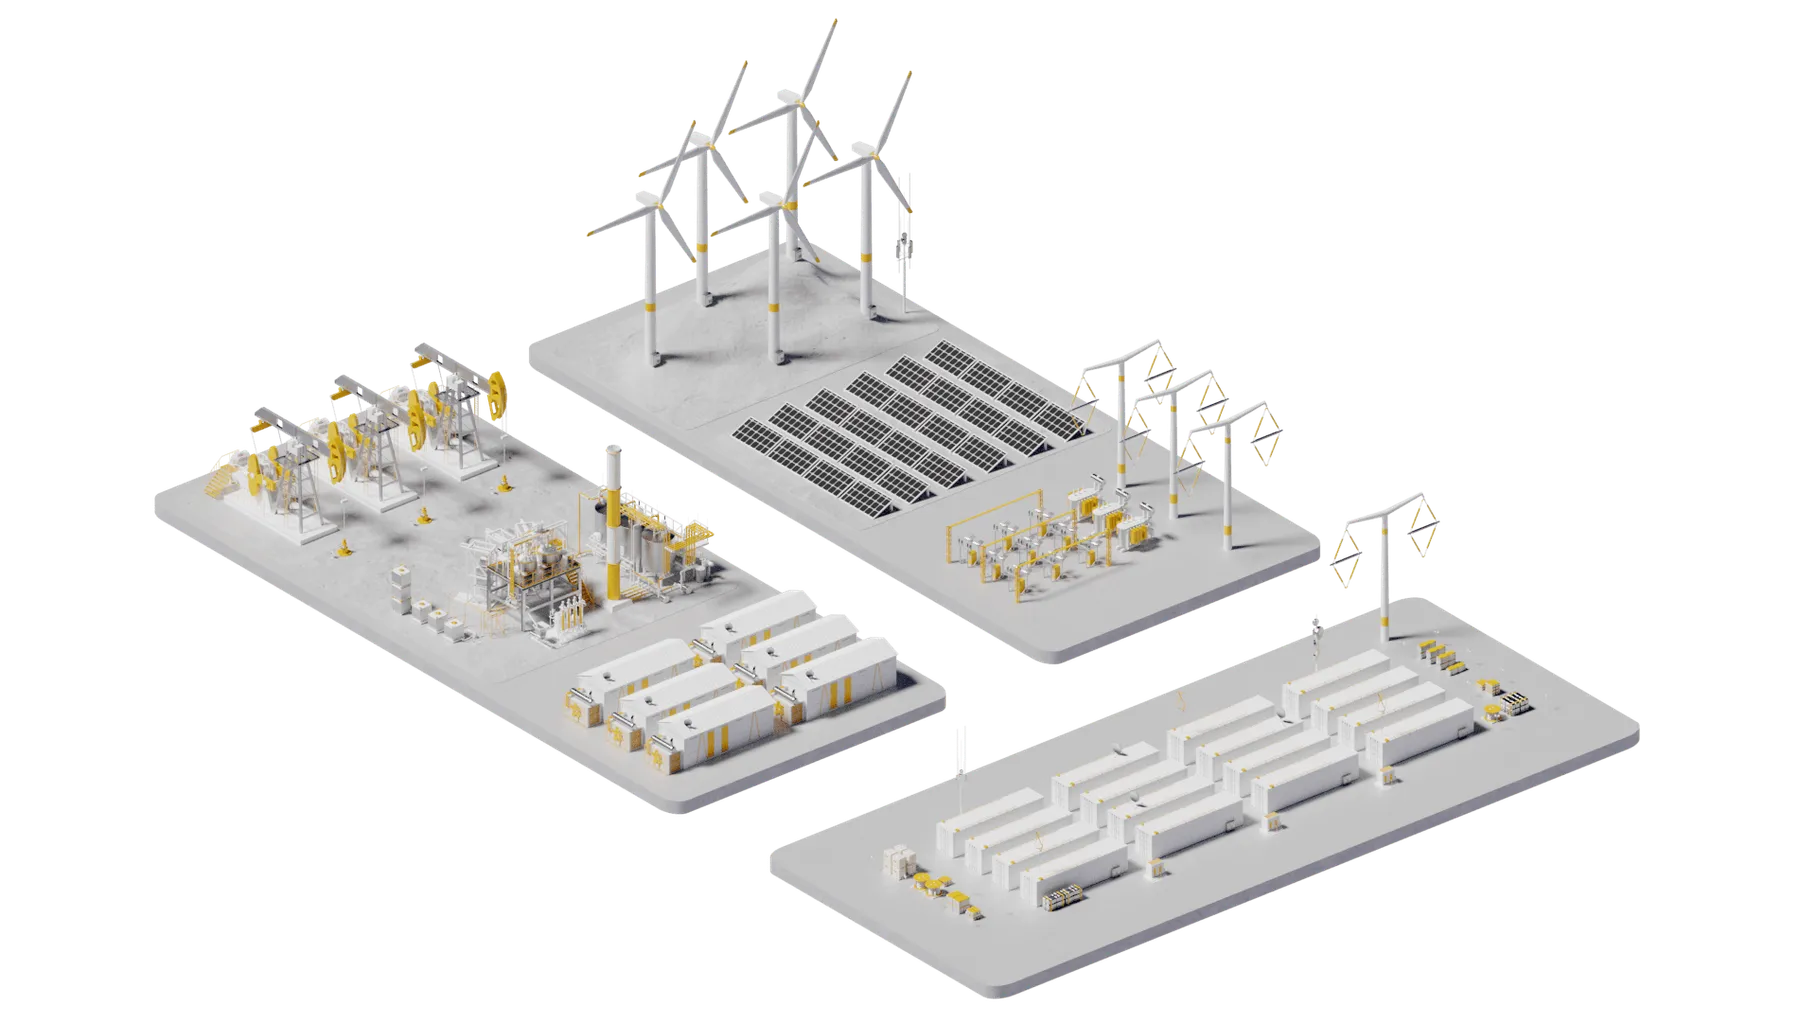 A 3d illustration of a power generation plant